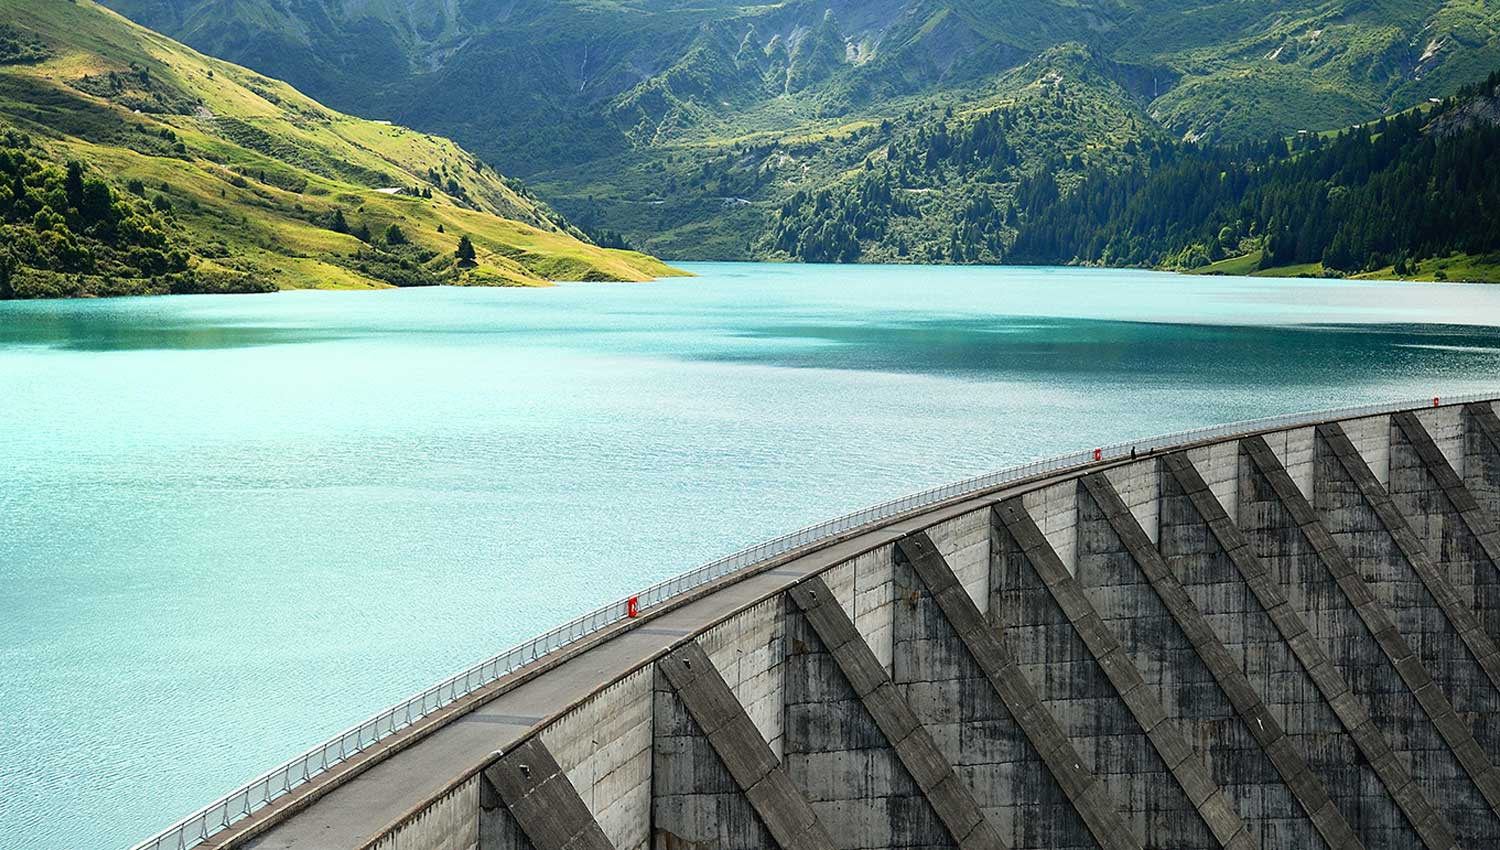 Safety of Dams and their Surroundings